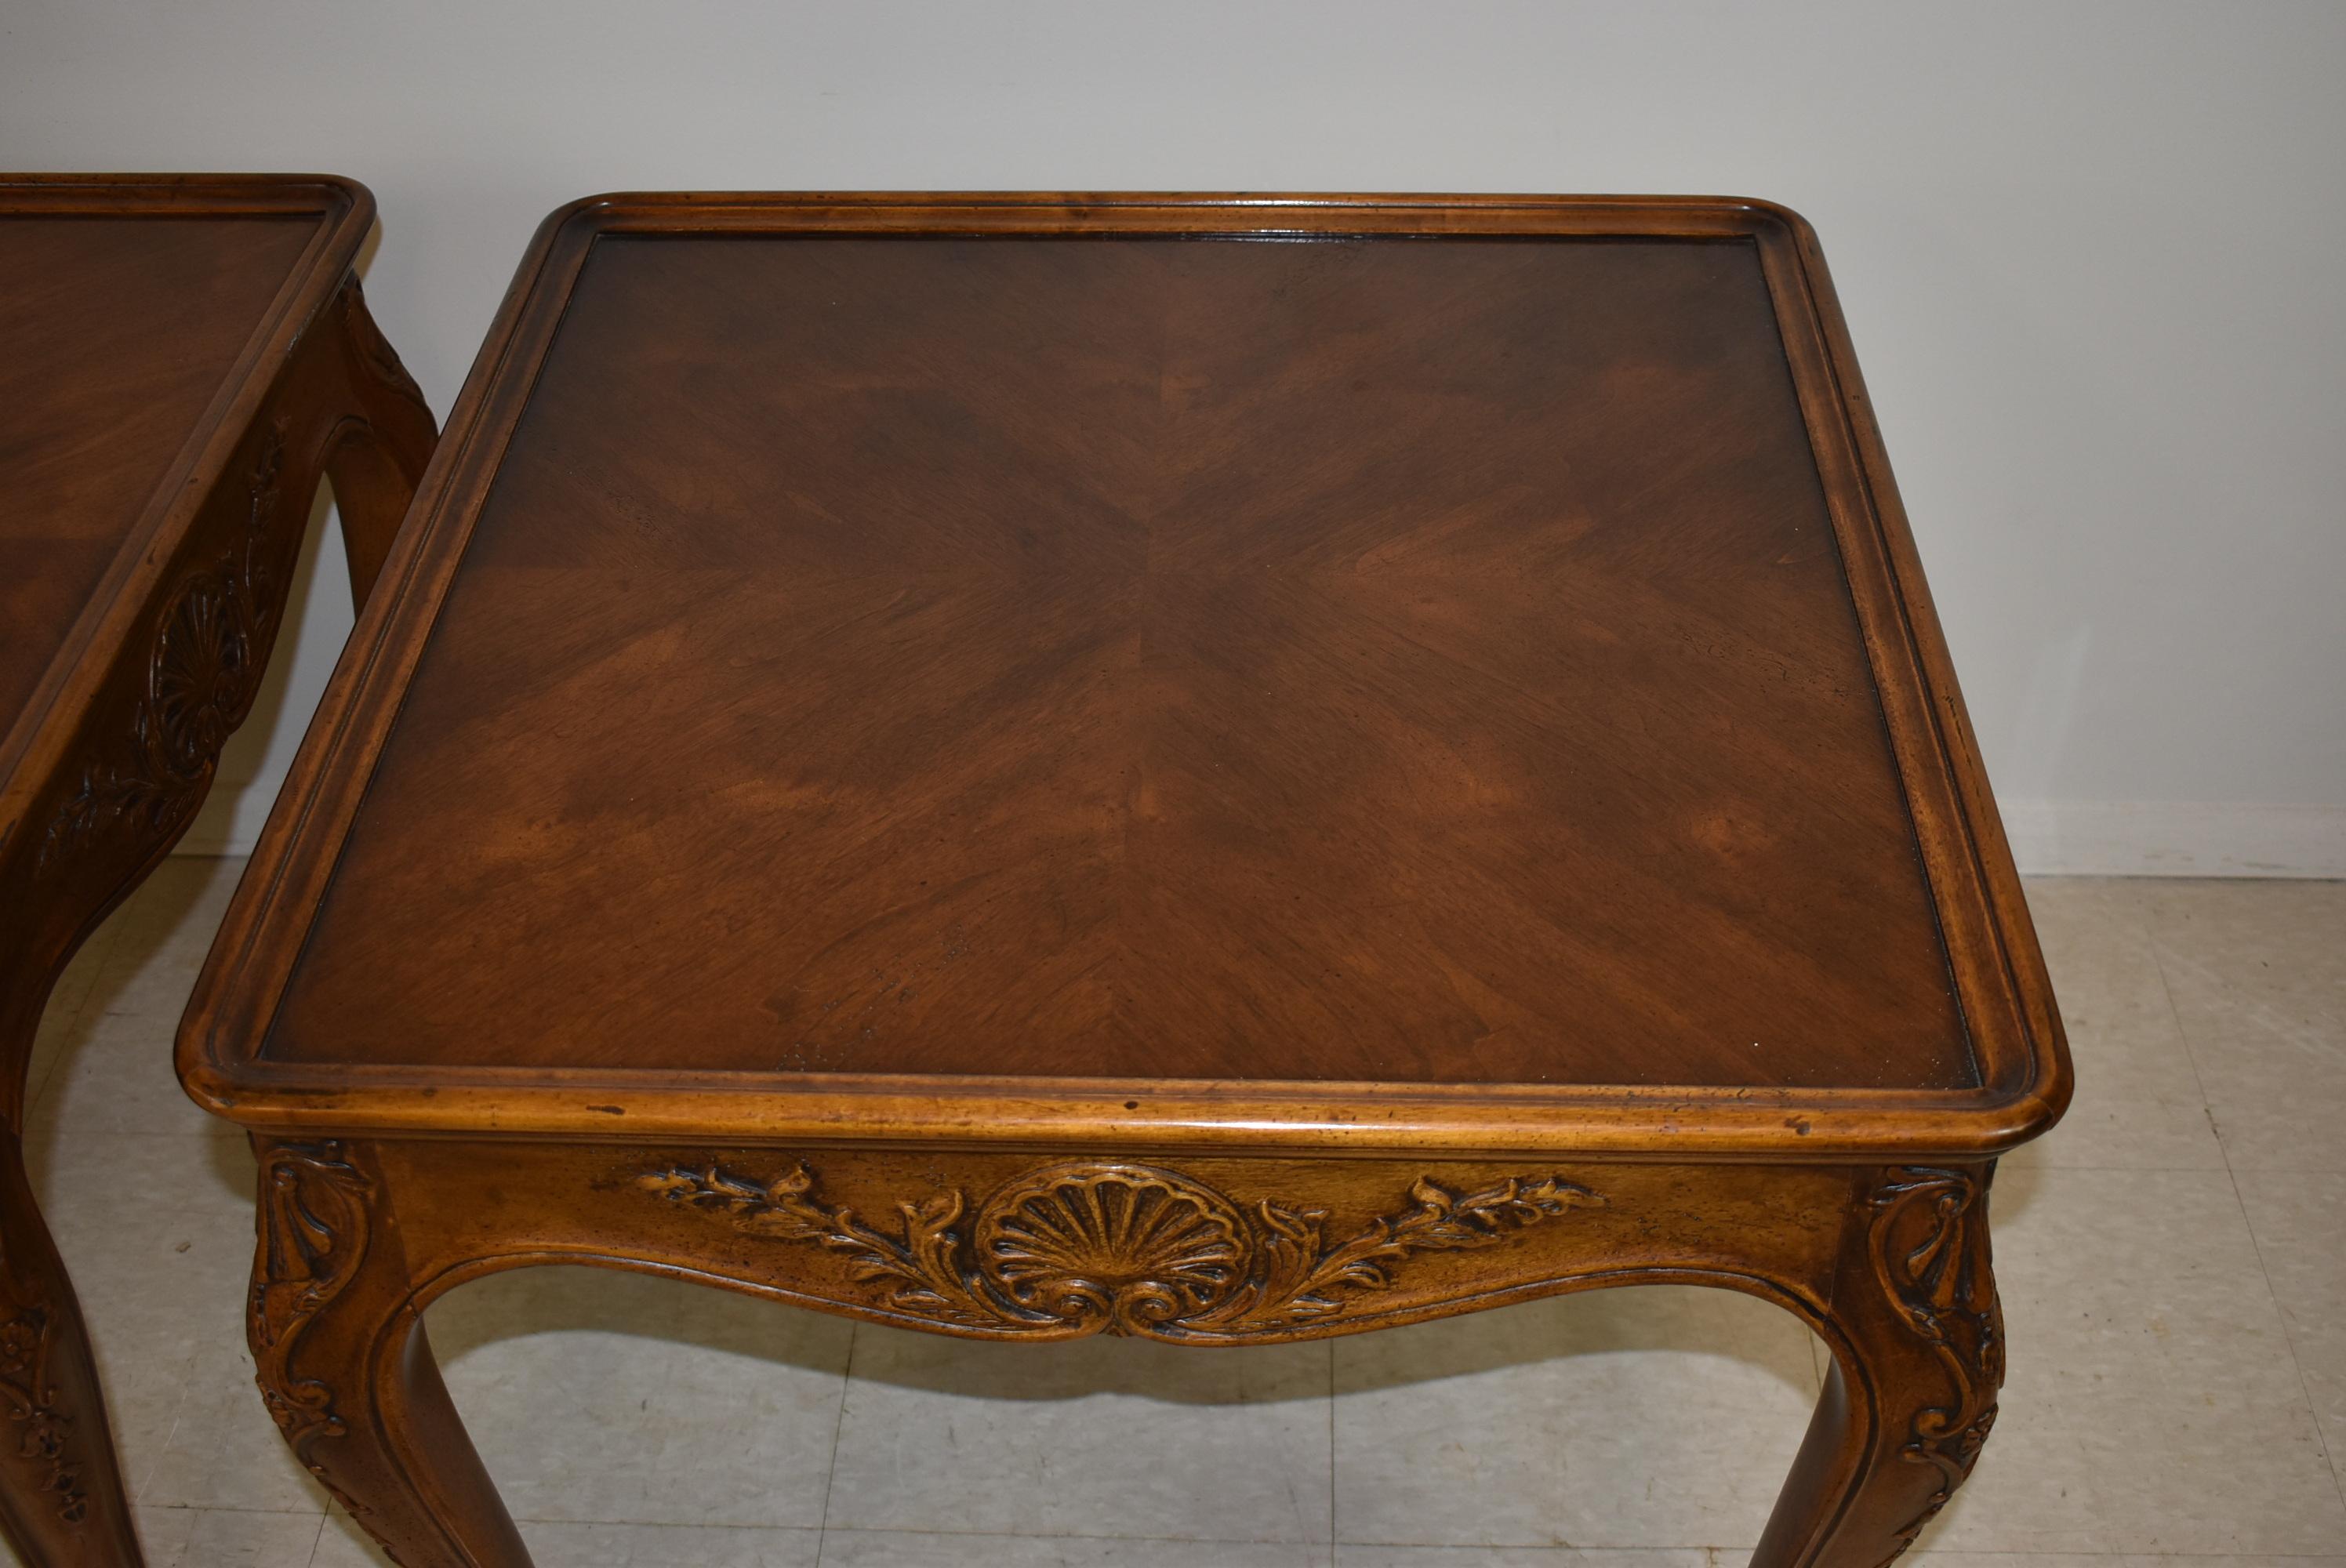 Pair of carved walnut Provincial style side tables by Henredon. Inlay patterned top.